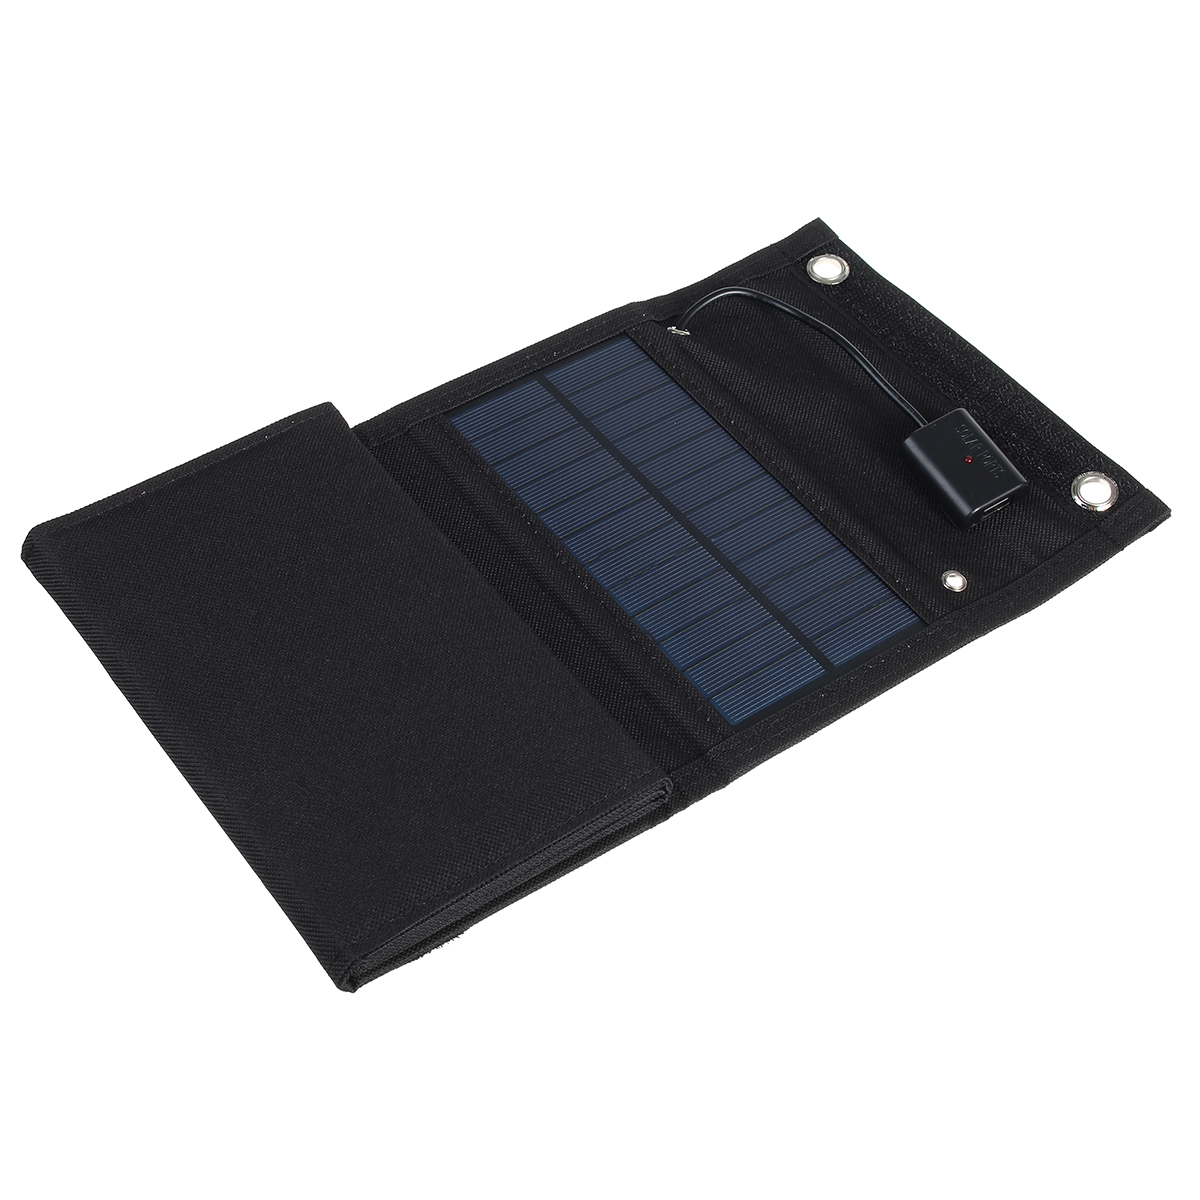 80W-Foldable-USB-Solar-Panel-Portable-Folding-Waterproof-Solar-Panel-Charger-Outdoor-Mobile-Power-Ba-1806137-8